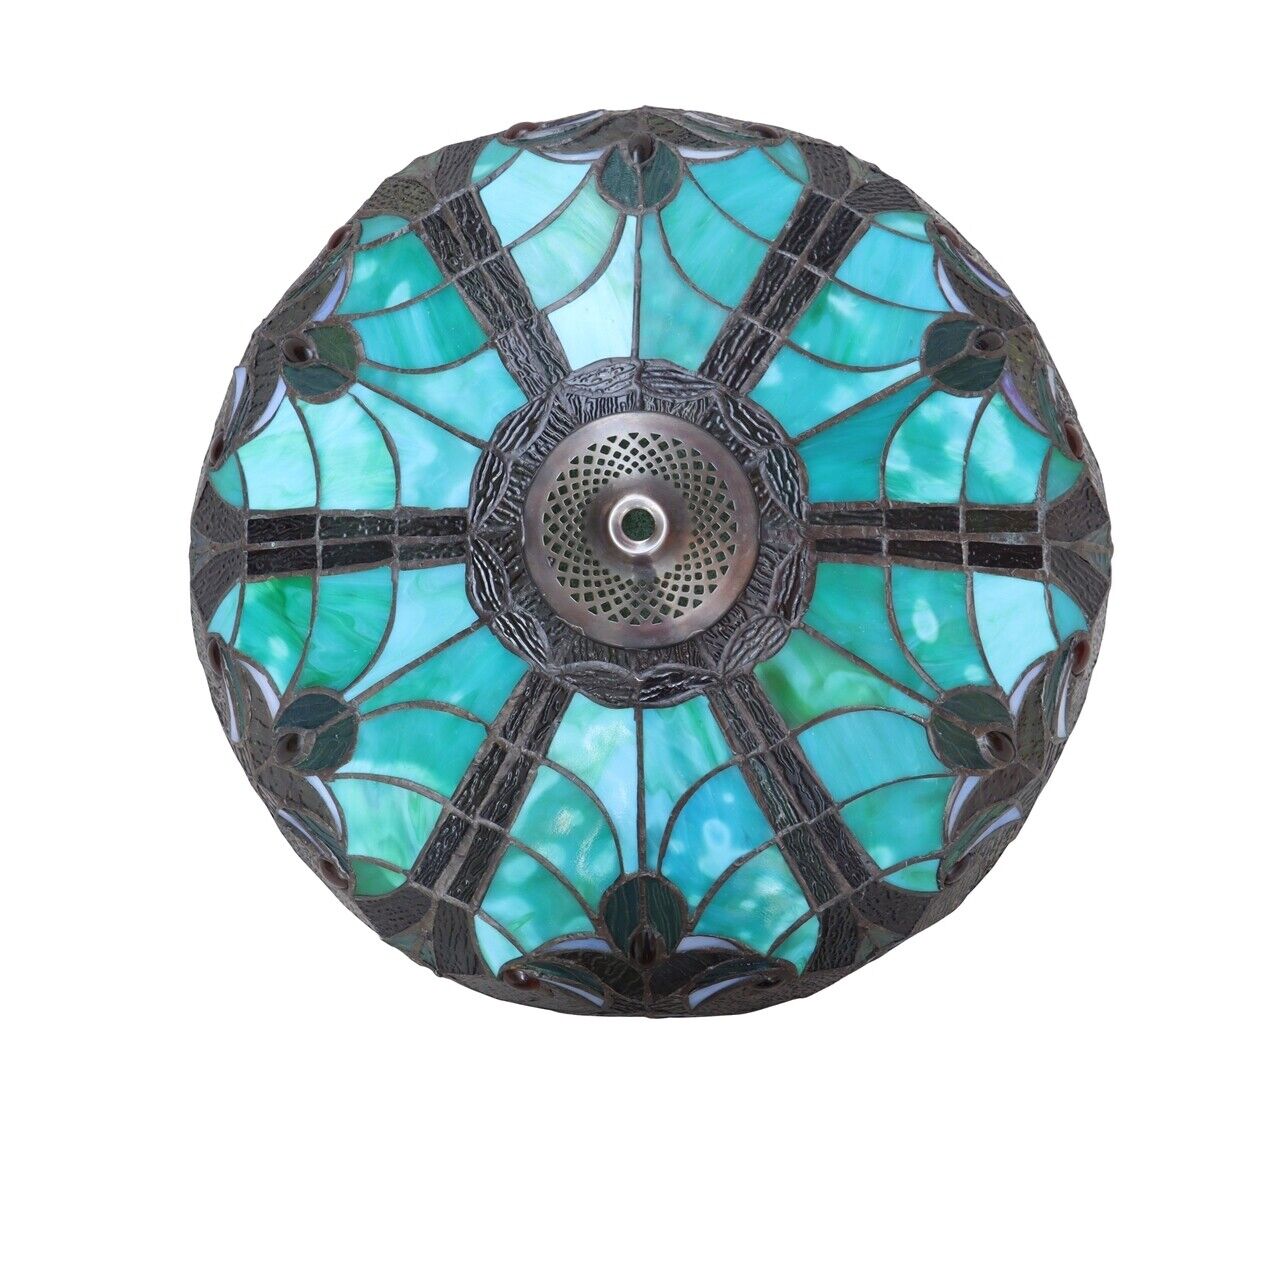 15.75" Stained Glass Semi Flush Ceiling Uplight